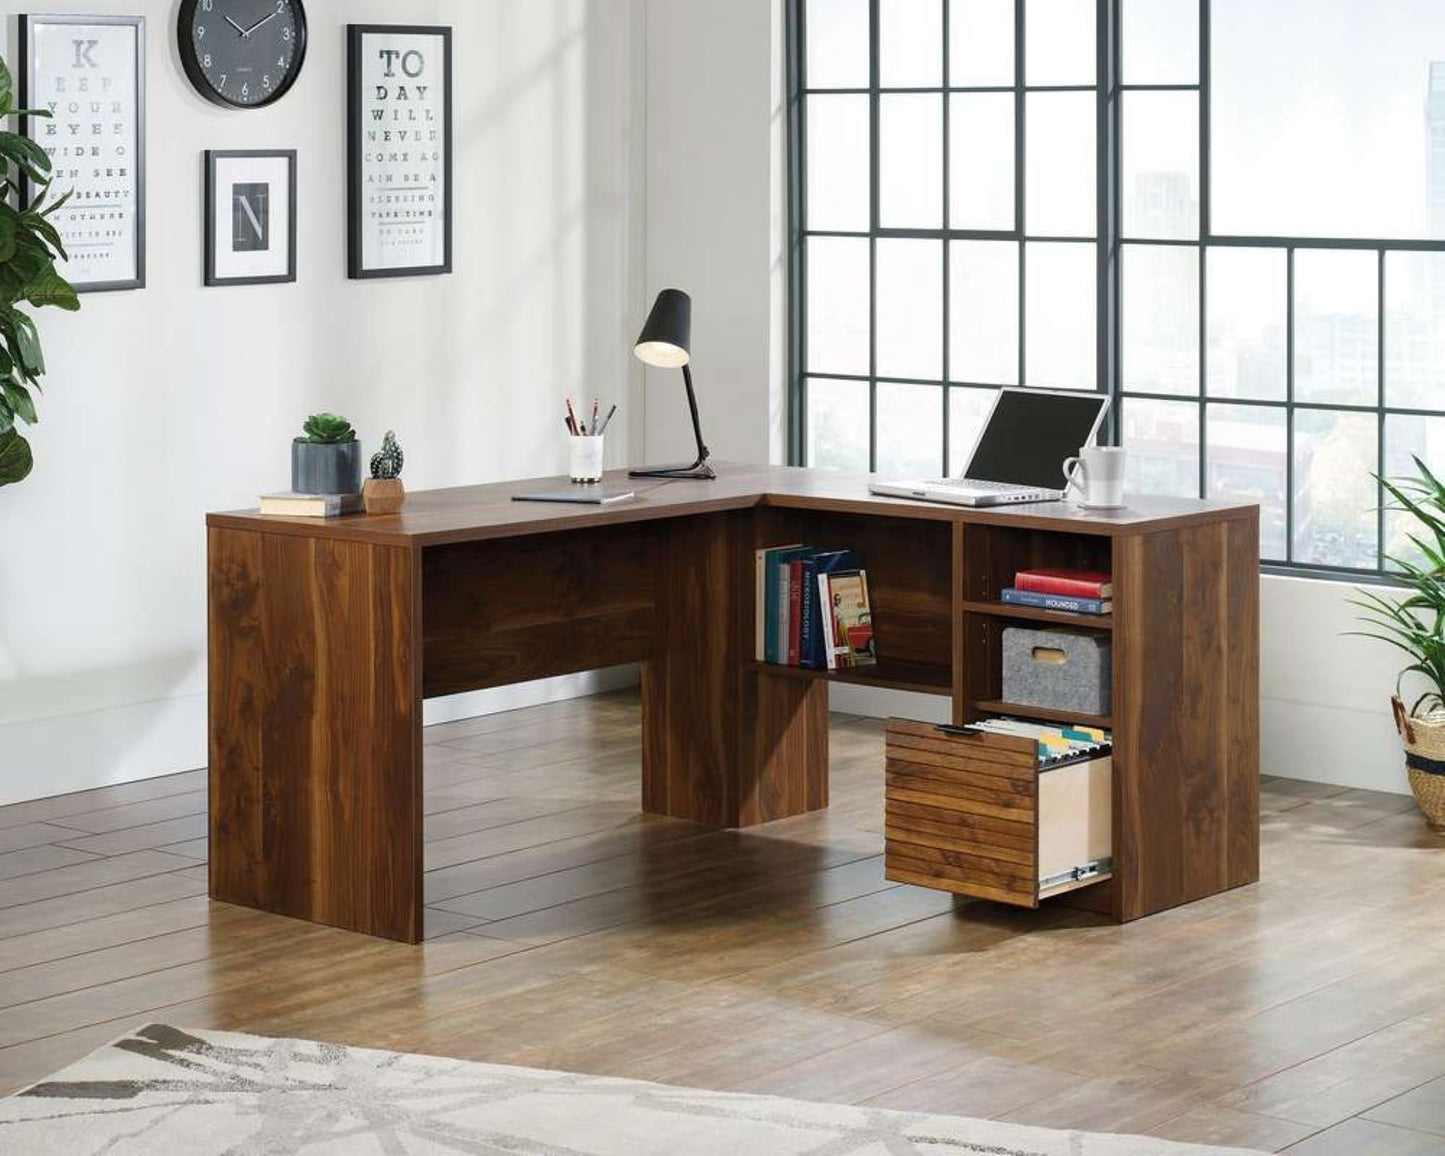 Retro / Mid Century style home office L-shaped office desk in Walnut finish